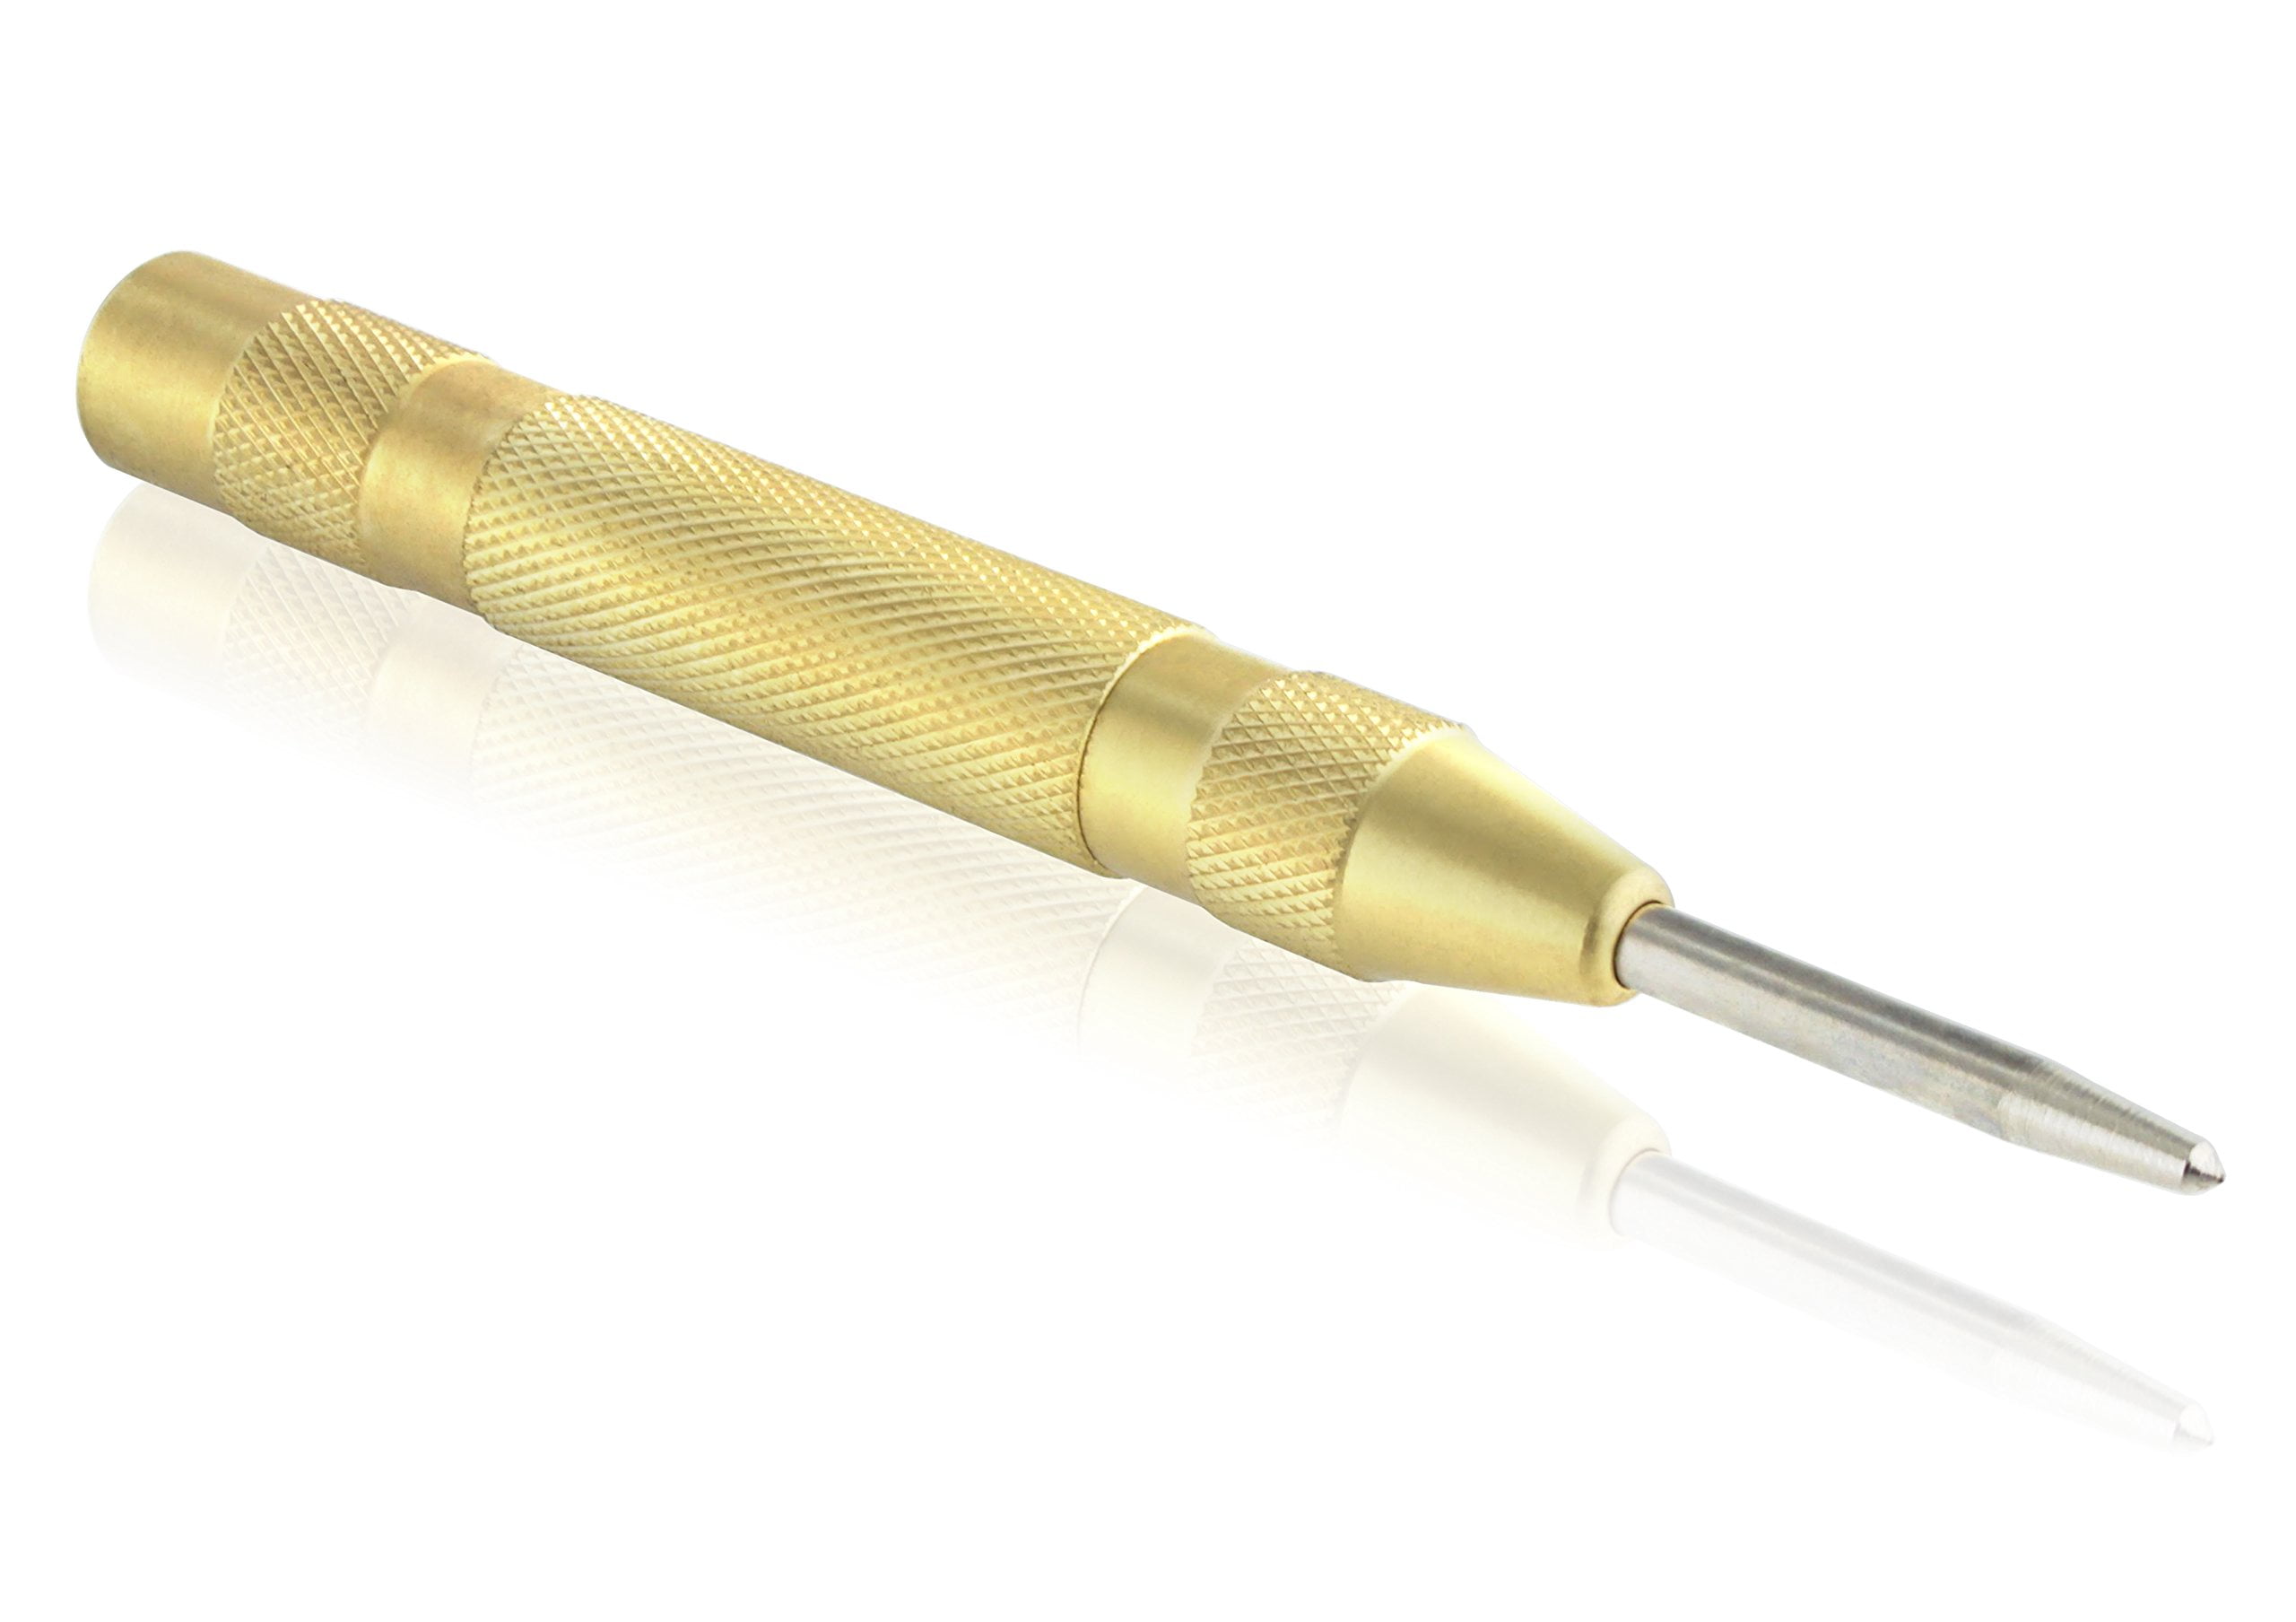 Center Punch - Automatic Center Punch with Brass Handle